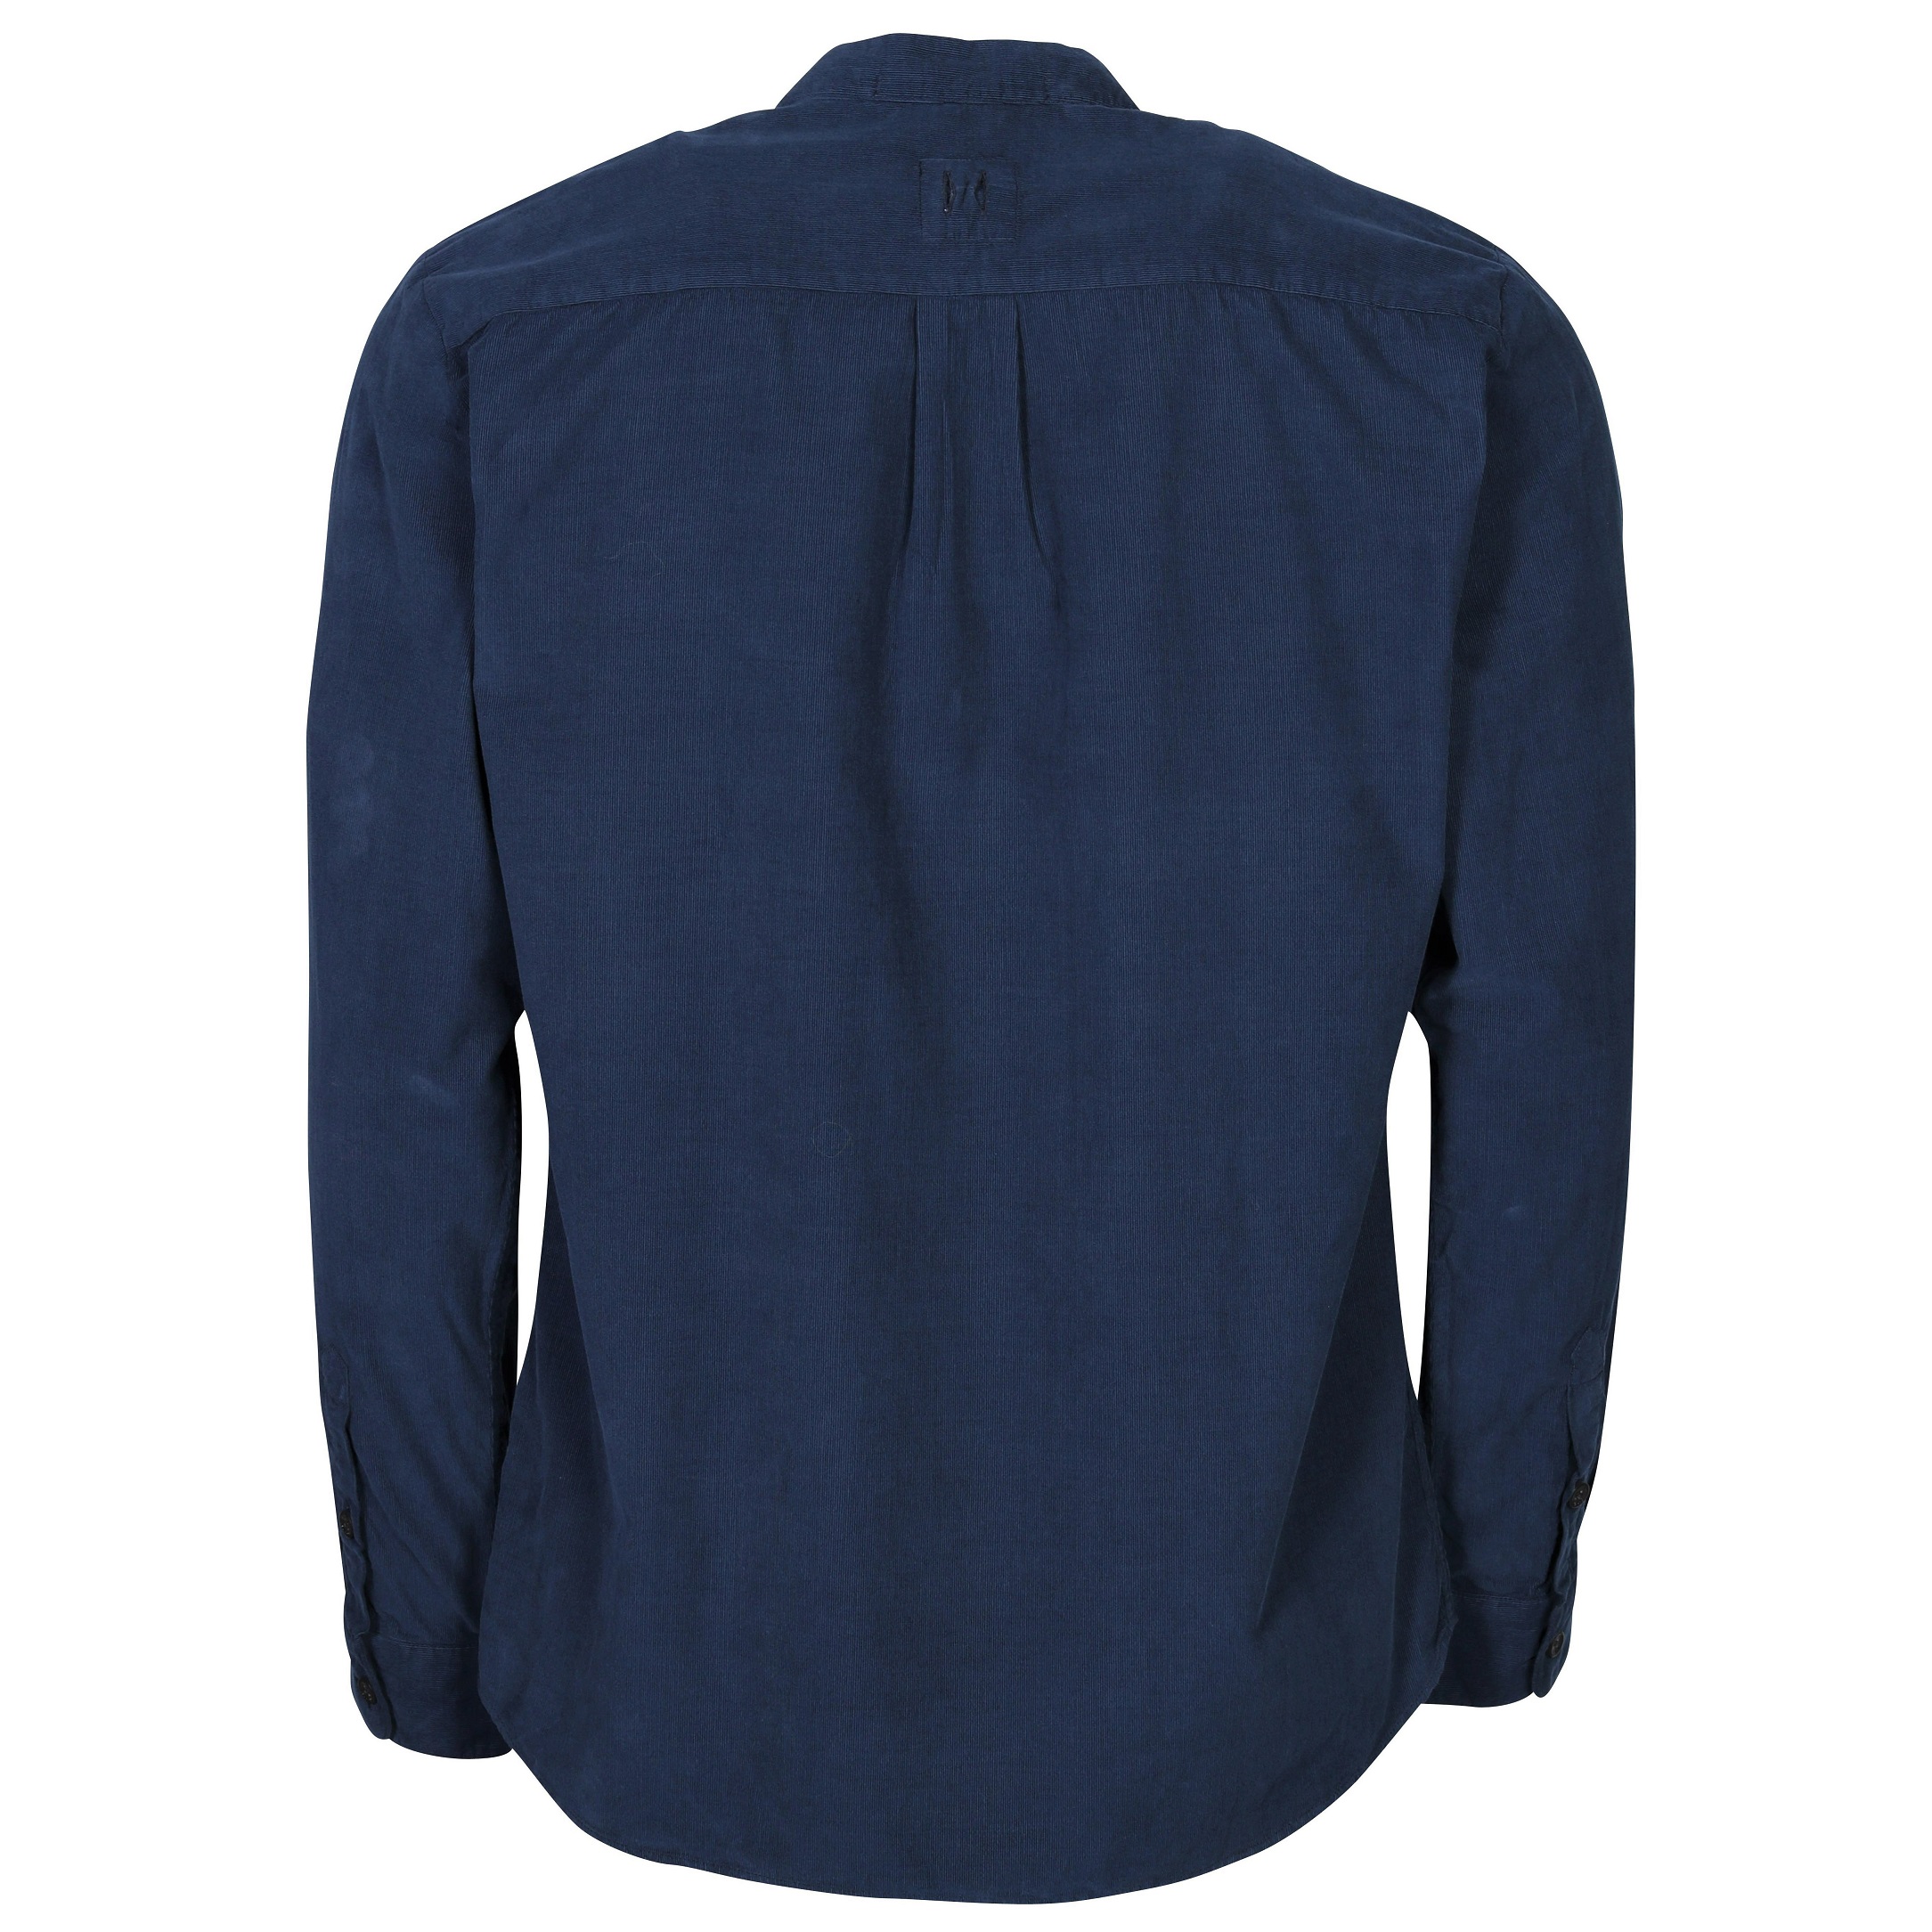 Hannes Roether Corduroy Shirt in Blue